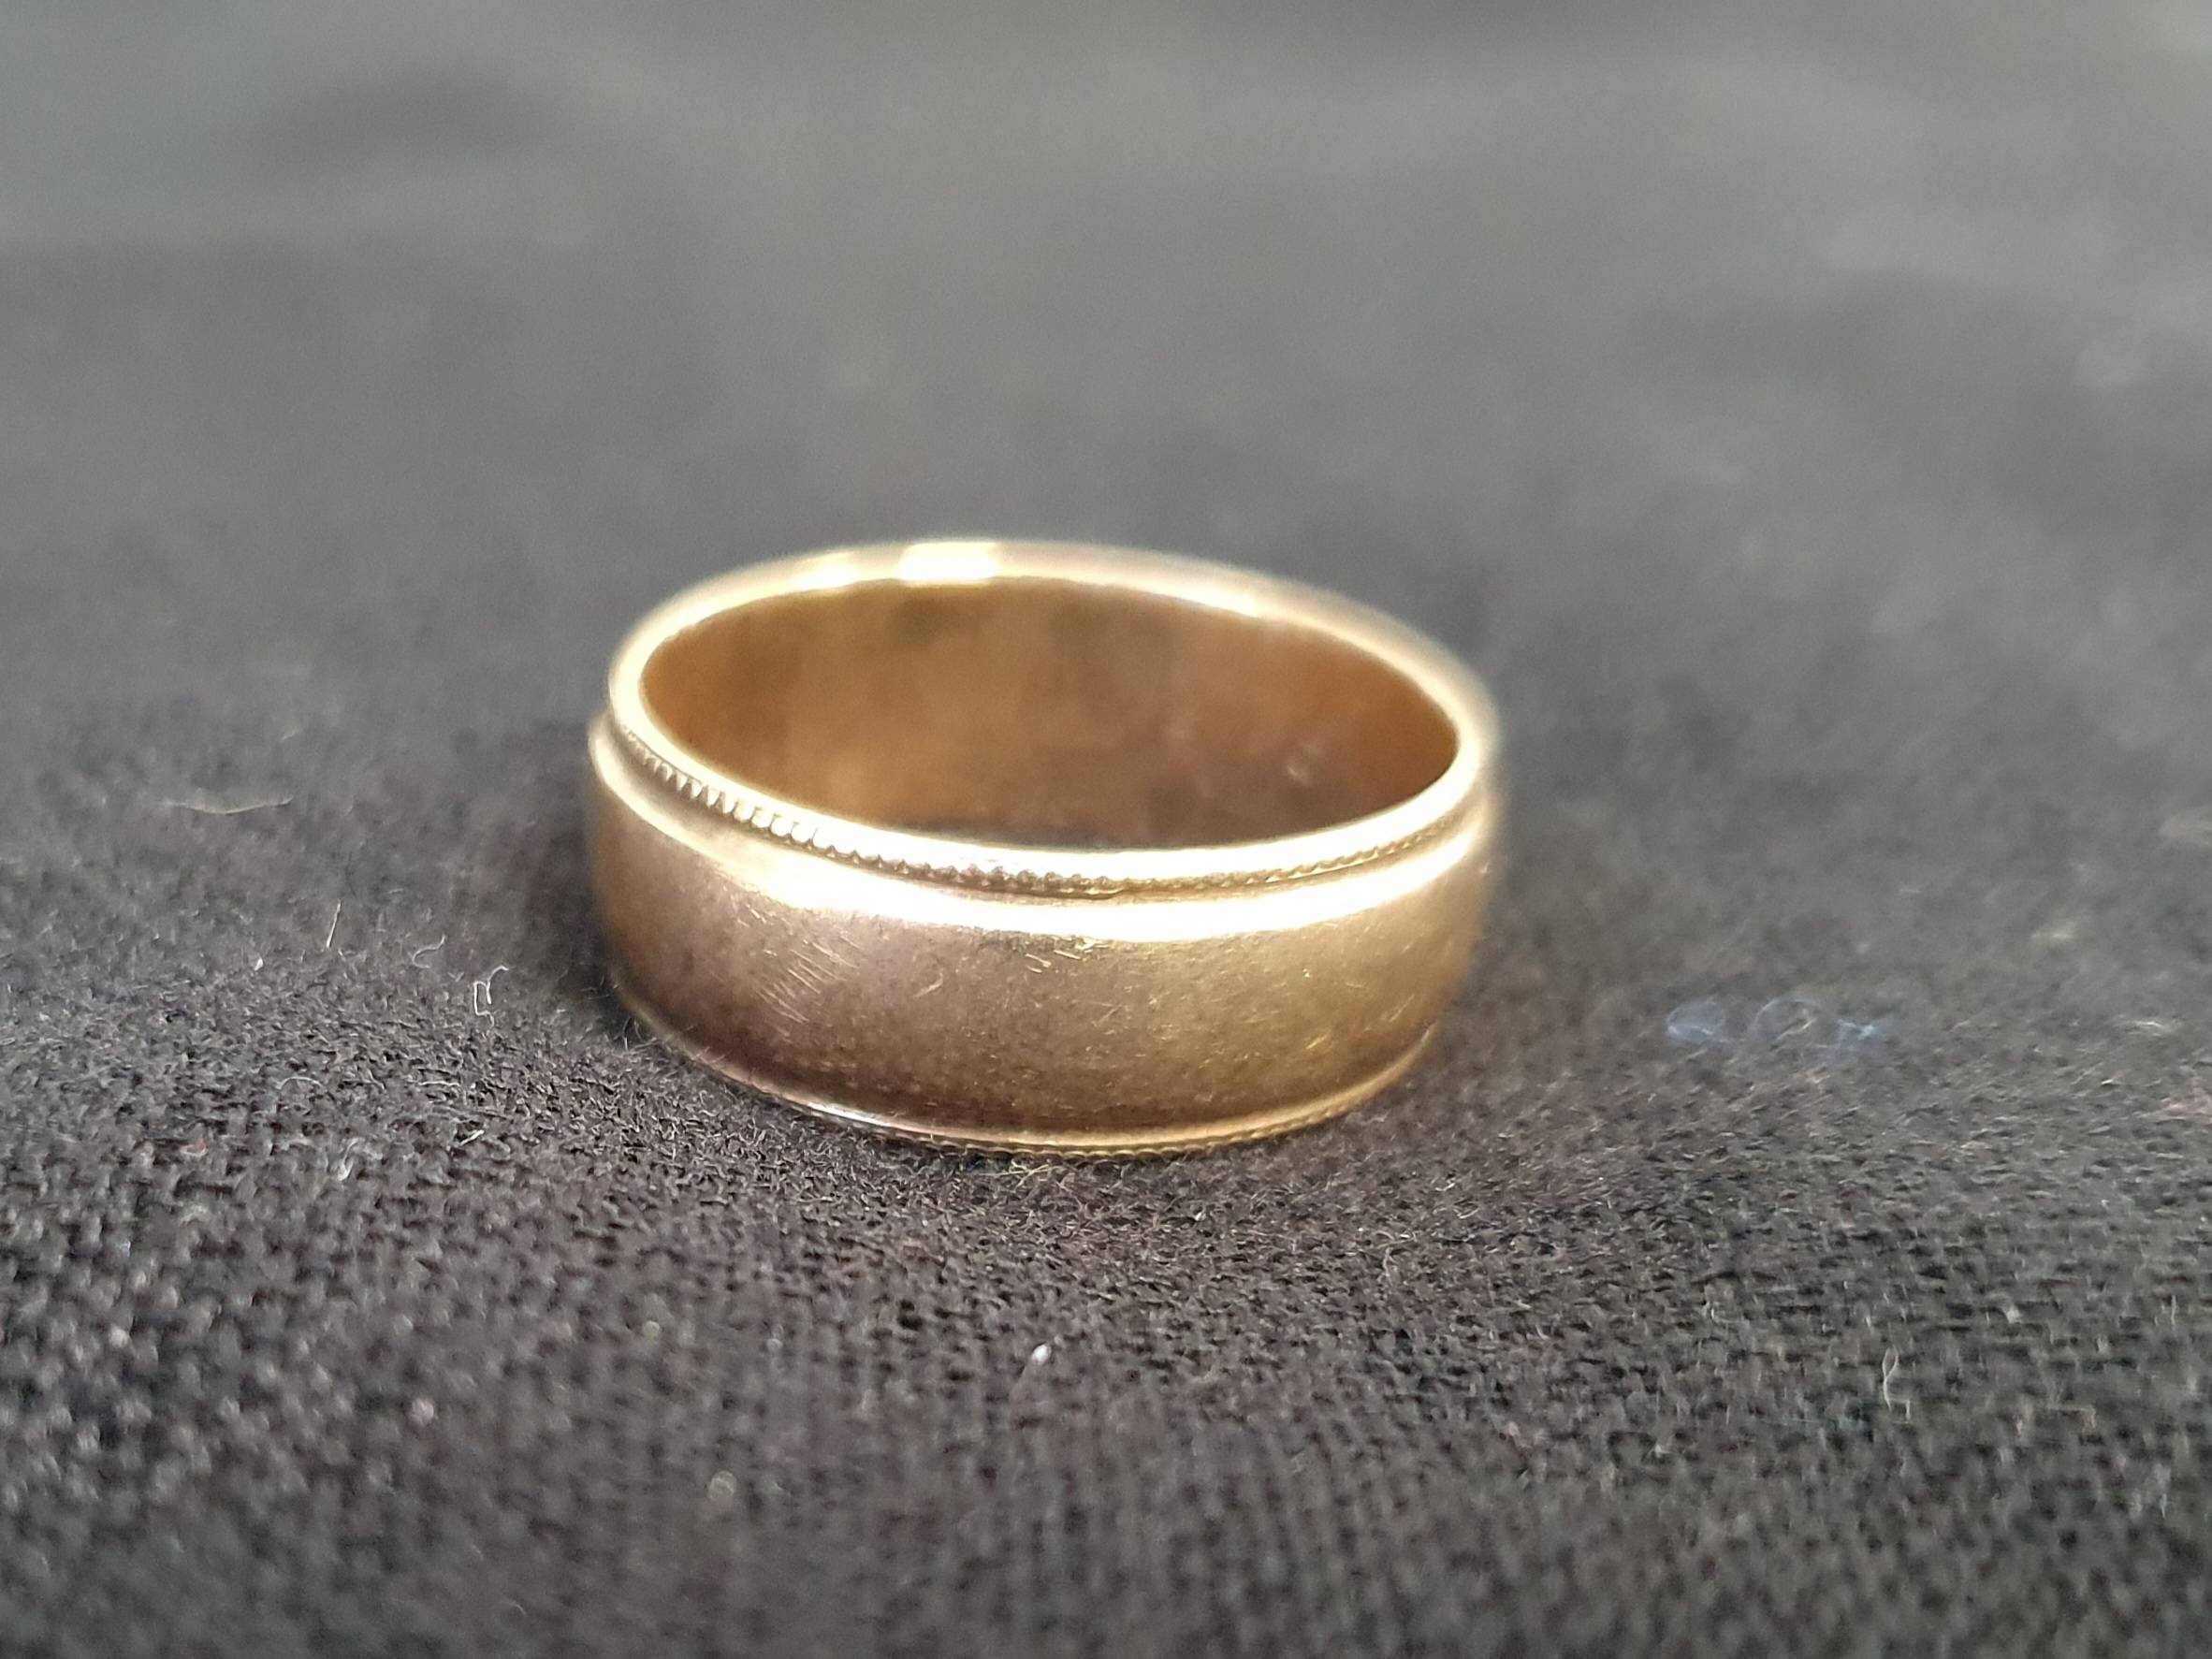 9ct Gold Wedding Band. Weight 5g. Size R - Image 2 of 2